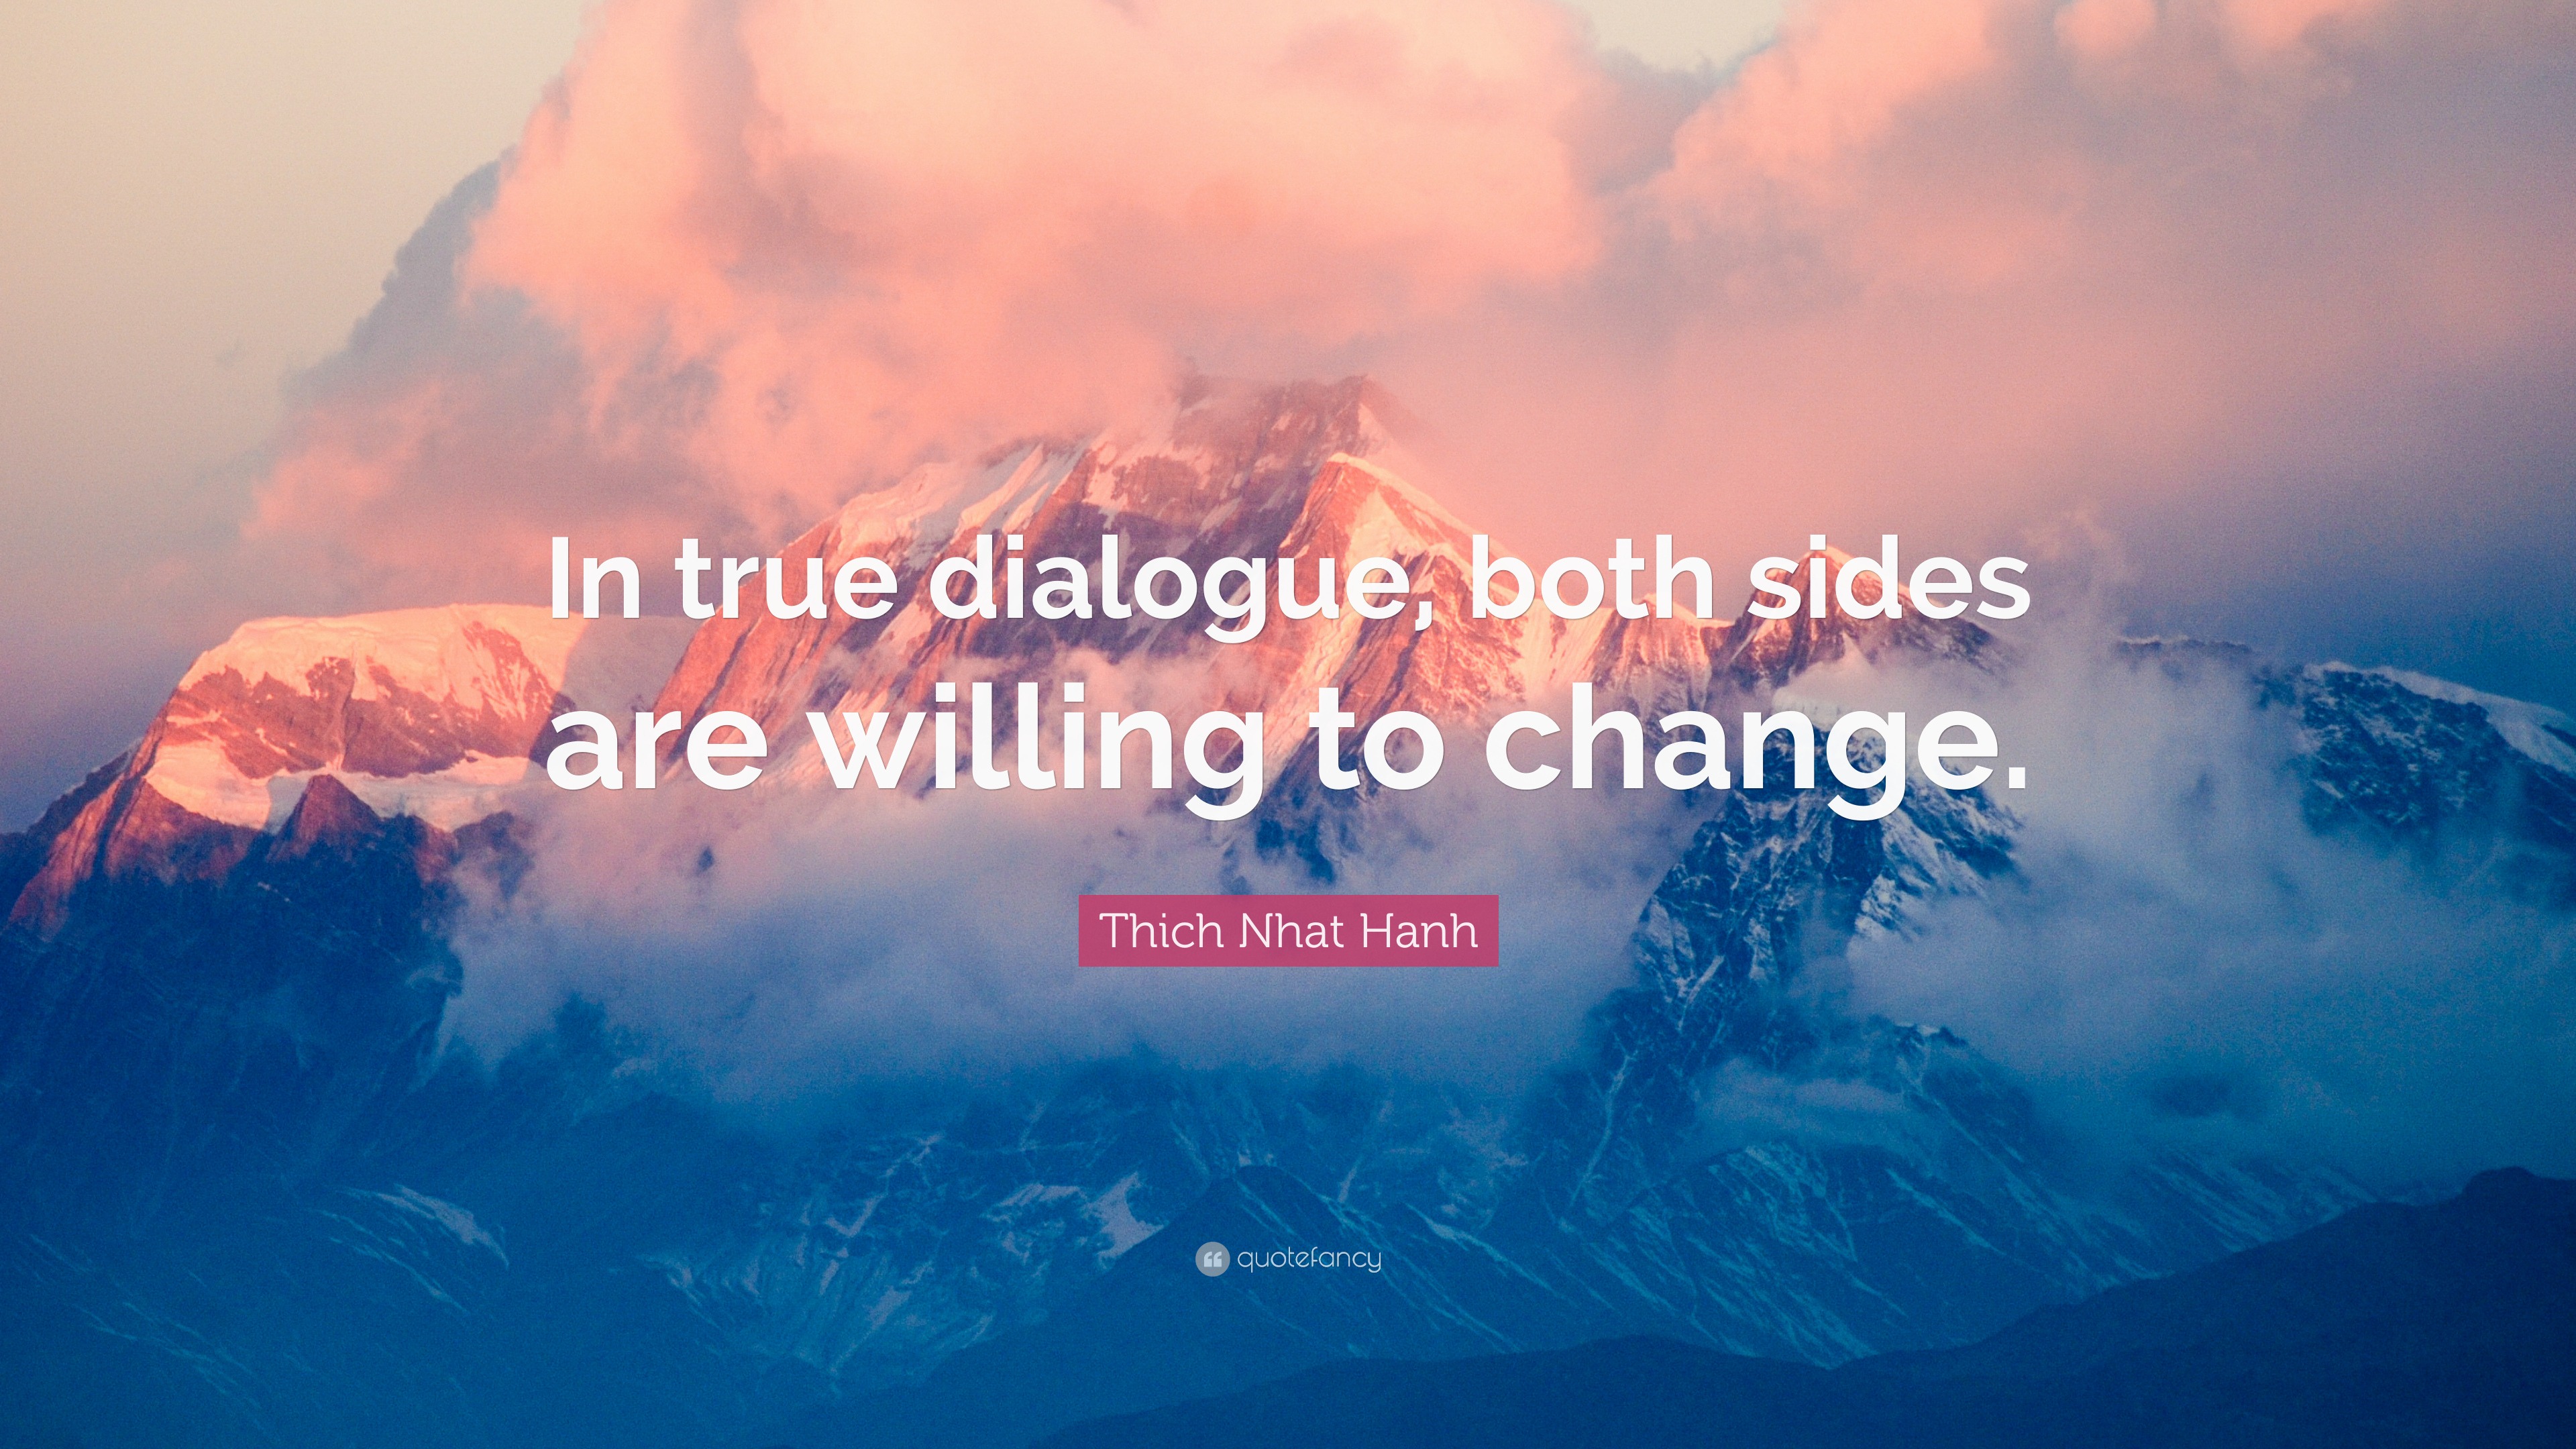 Thich Nhat Hanh Quote “In true dialogue both sides are willing to change